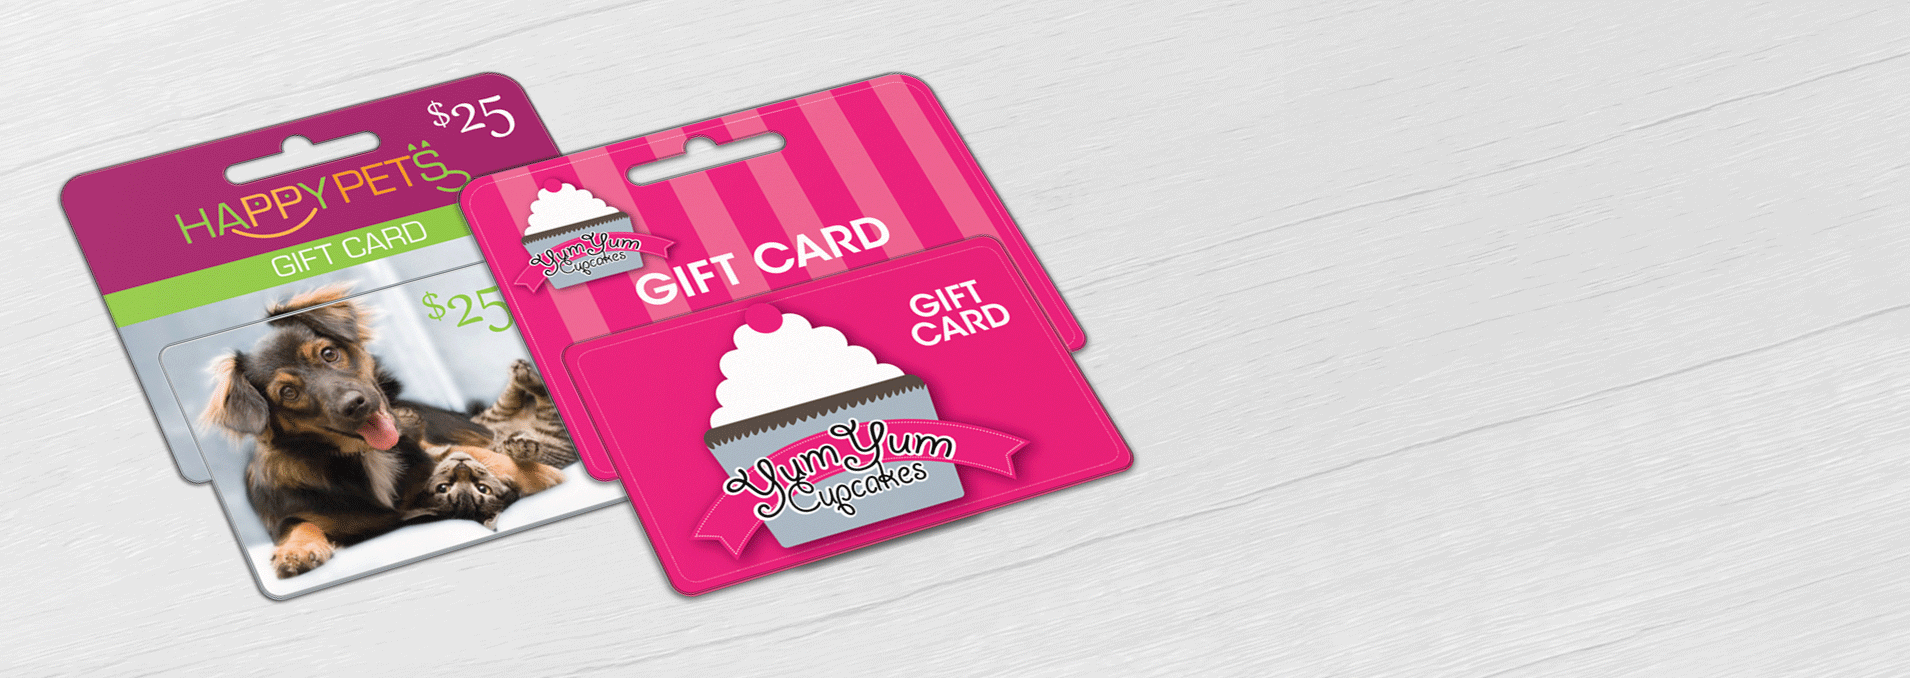 Small Hanging Display Gift Cards